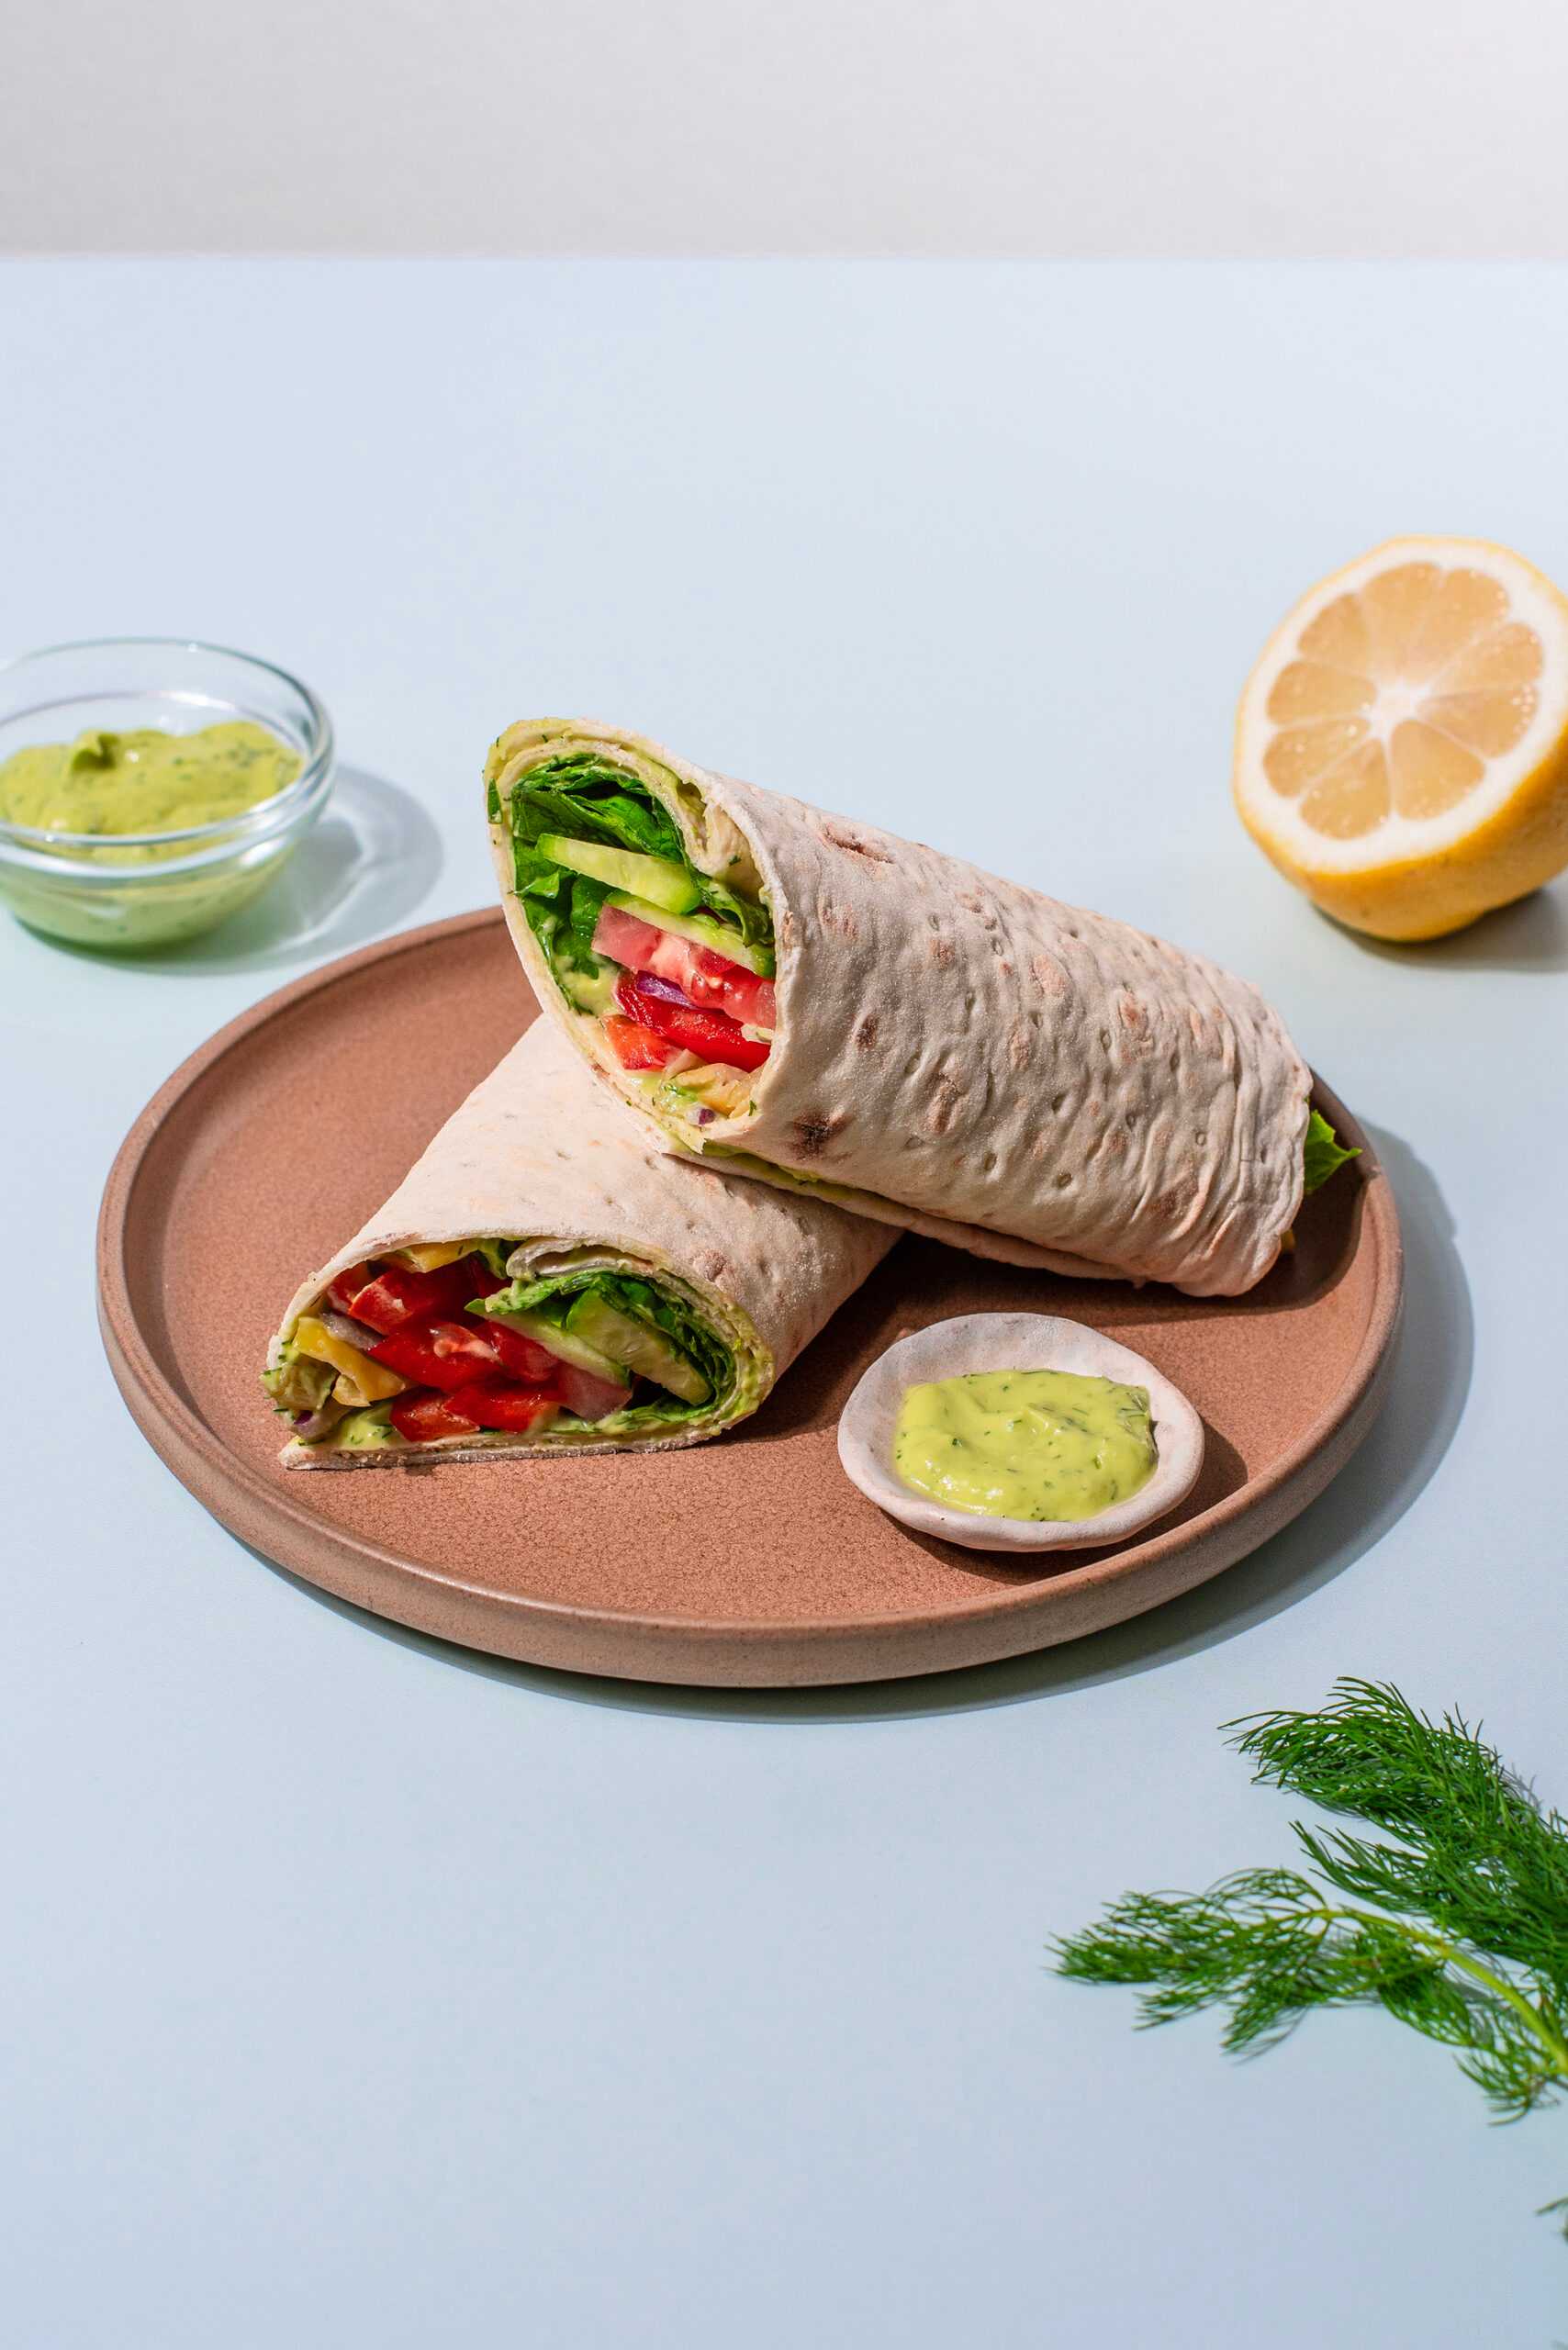 Veggie-filled wraps sit in the center of the image on a plate, surrounded by lemons and herbs.